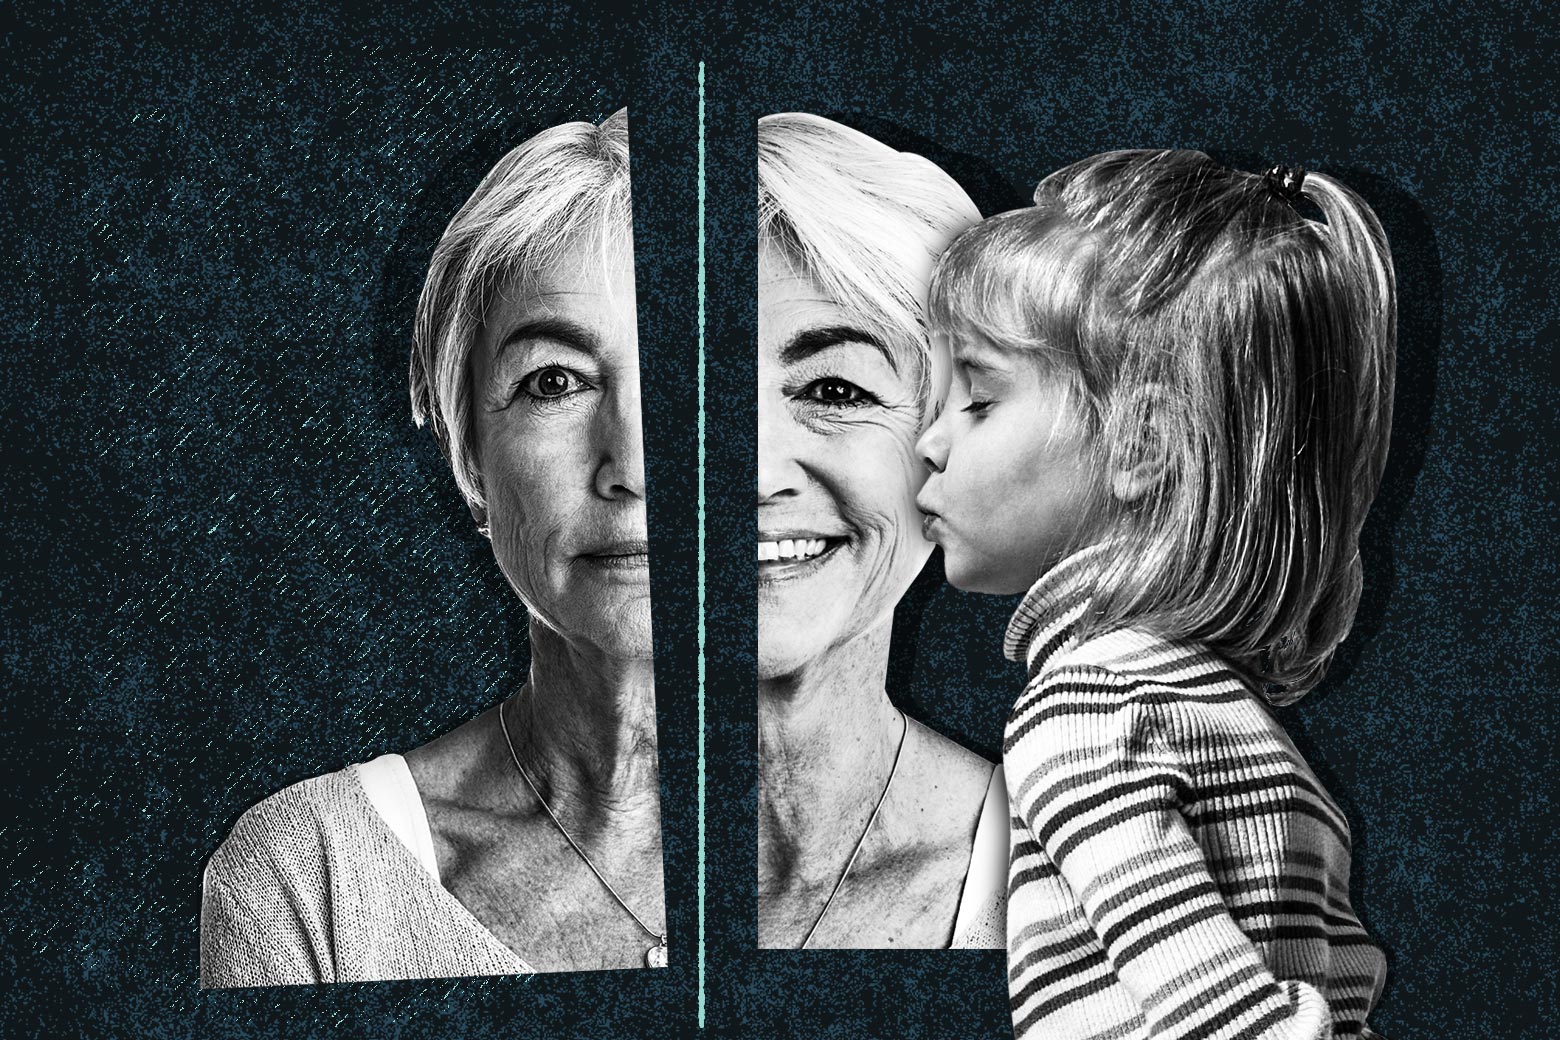 A grandmother's face split in half. The left side shows her sad and lonely. The right side shows her happy, being kissed on the cheek by her great granddaughter.